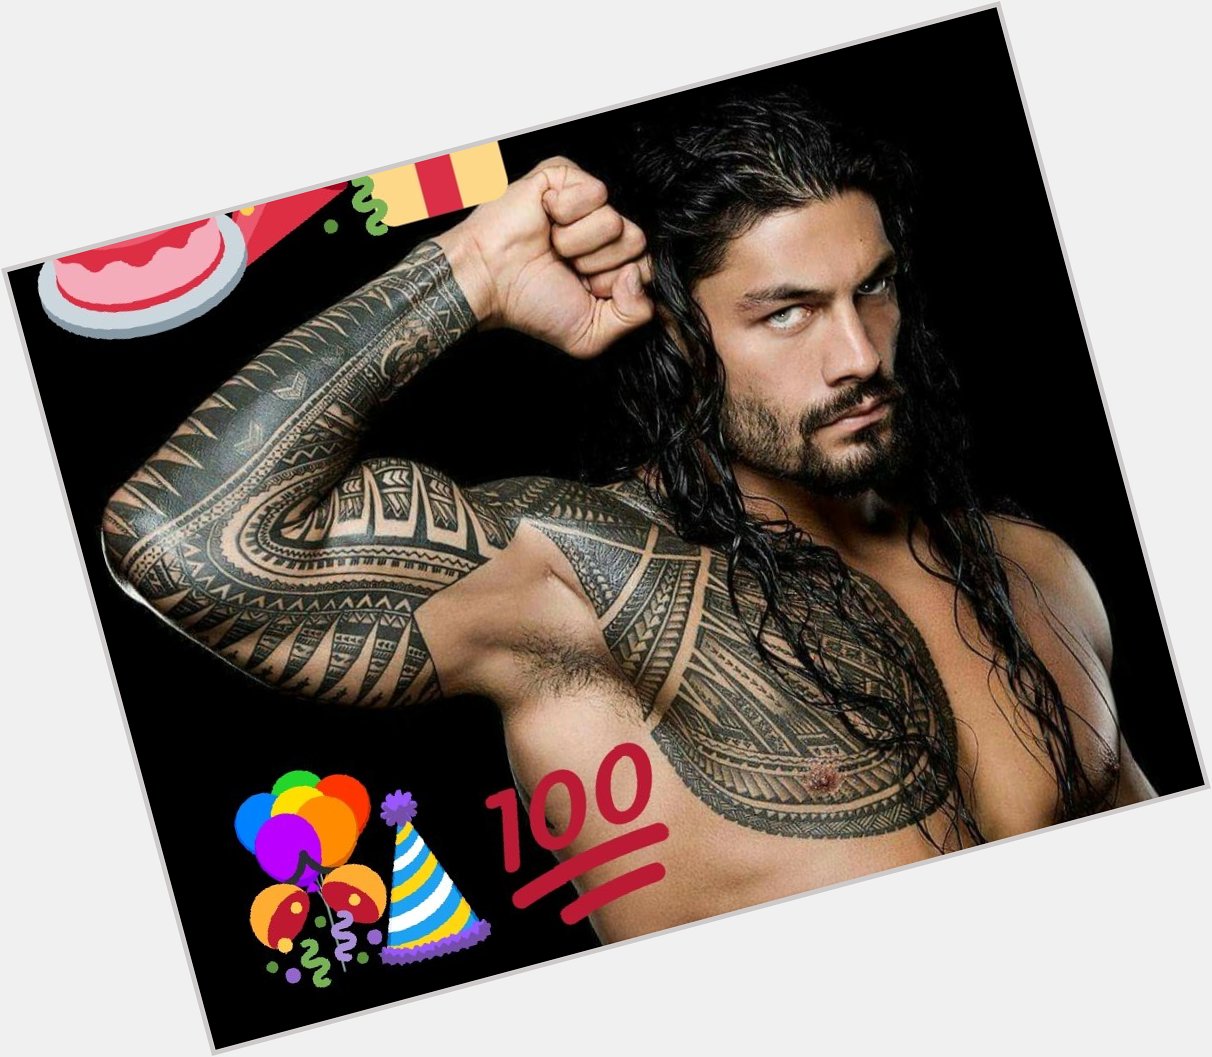   Happy birthday from another Roman Reigns fan to you 